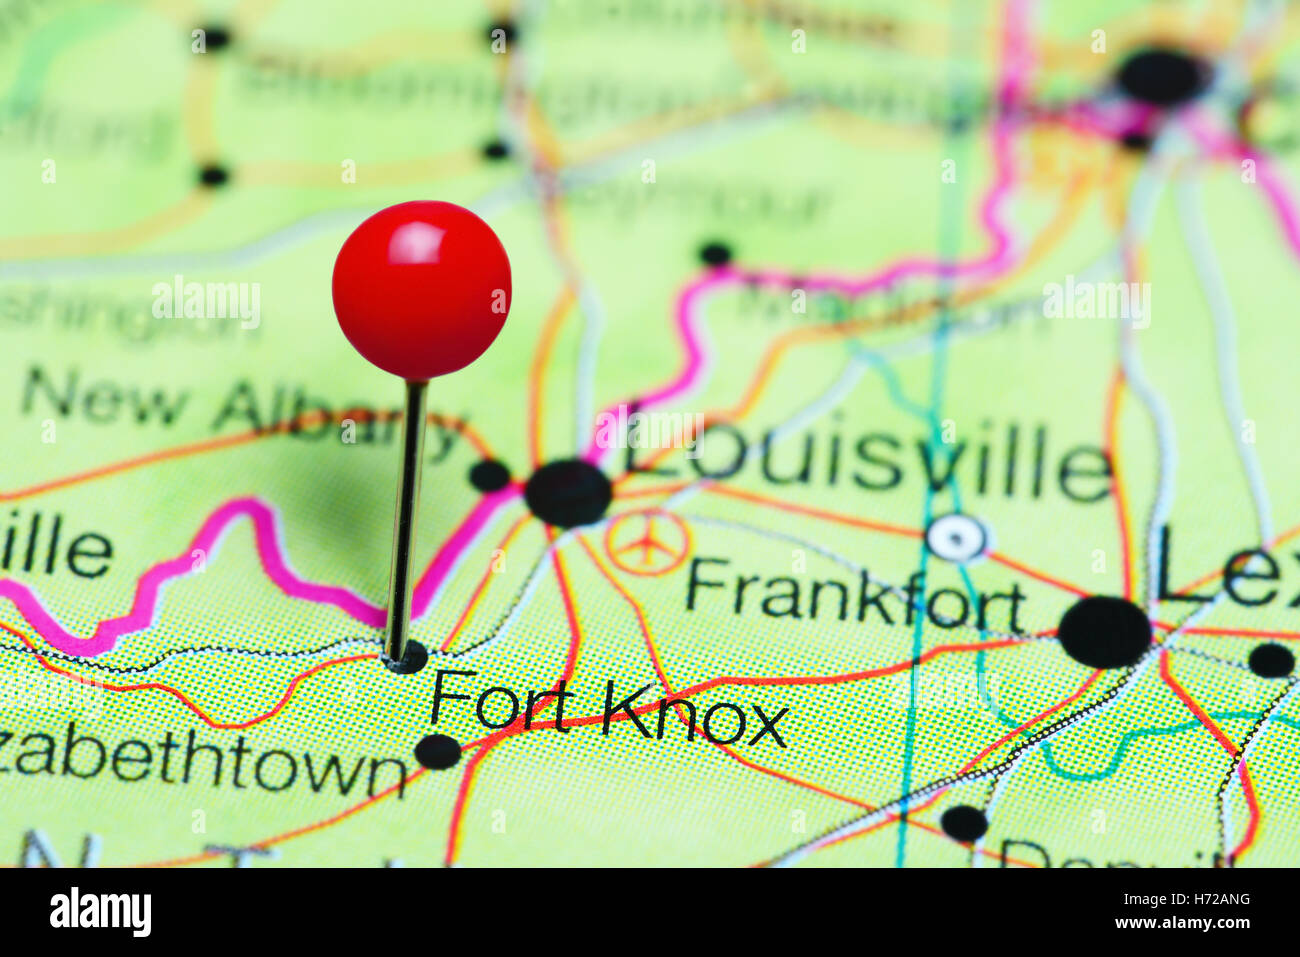 Fort Knox pinned on a map of Kentucky, USA Stock Photo